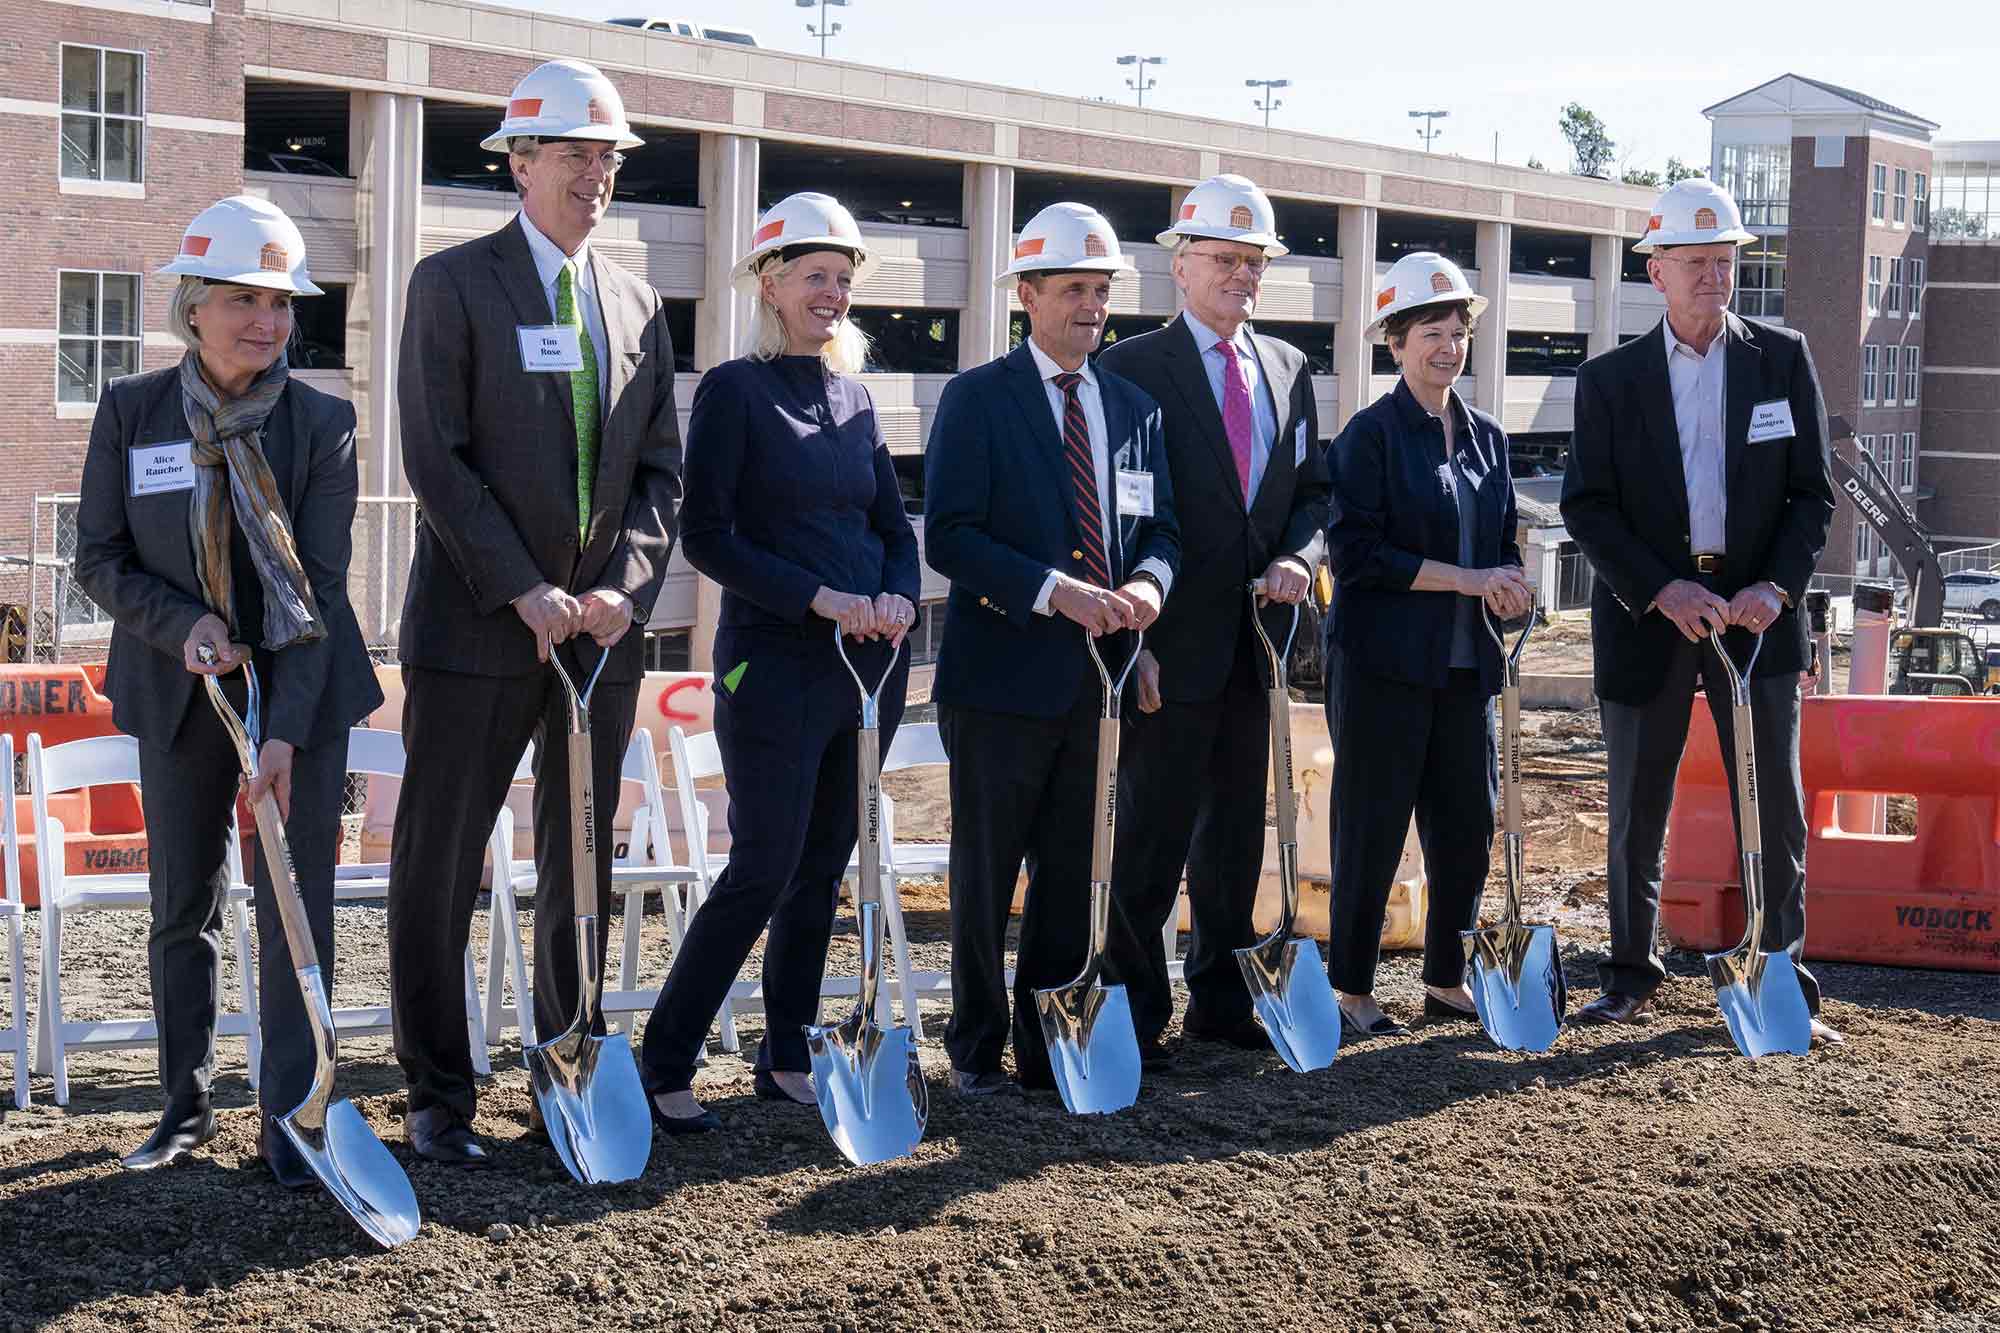 Seven adults in hard hats stand in a row, holding shiny shovels and posing for a group shot